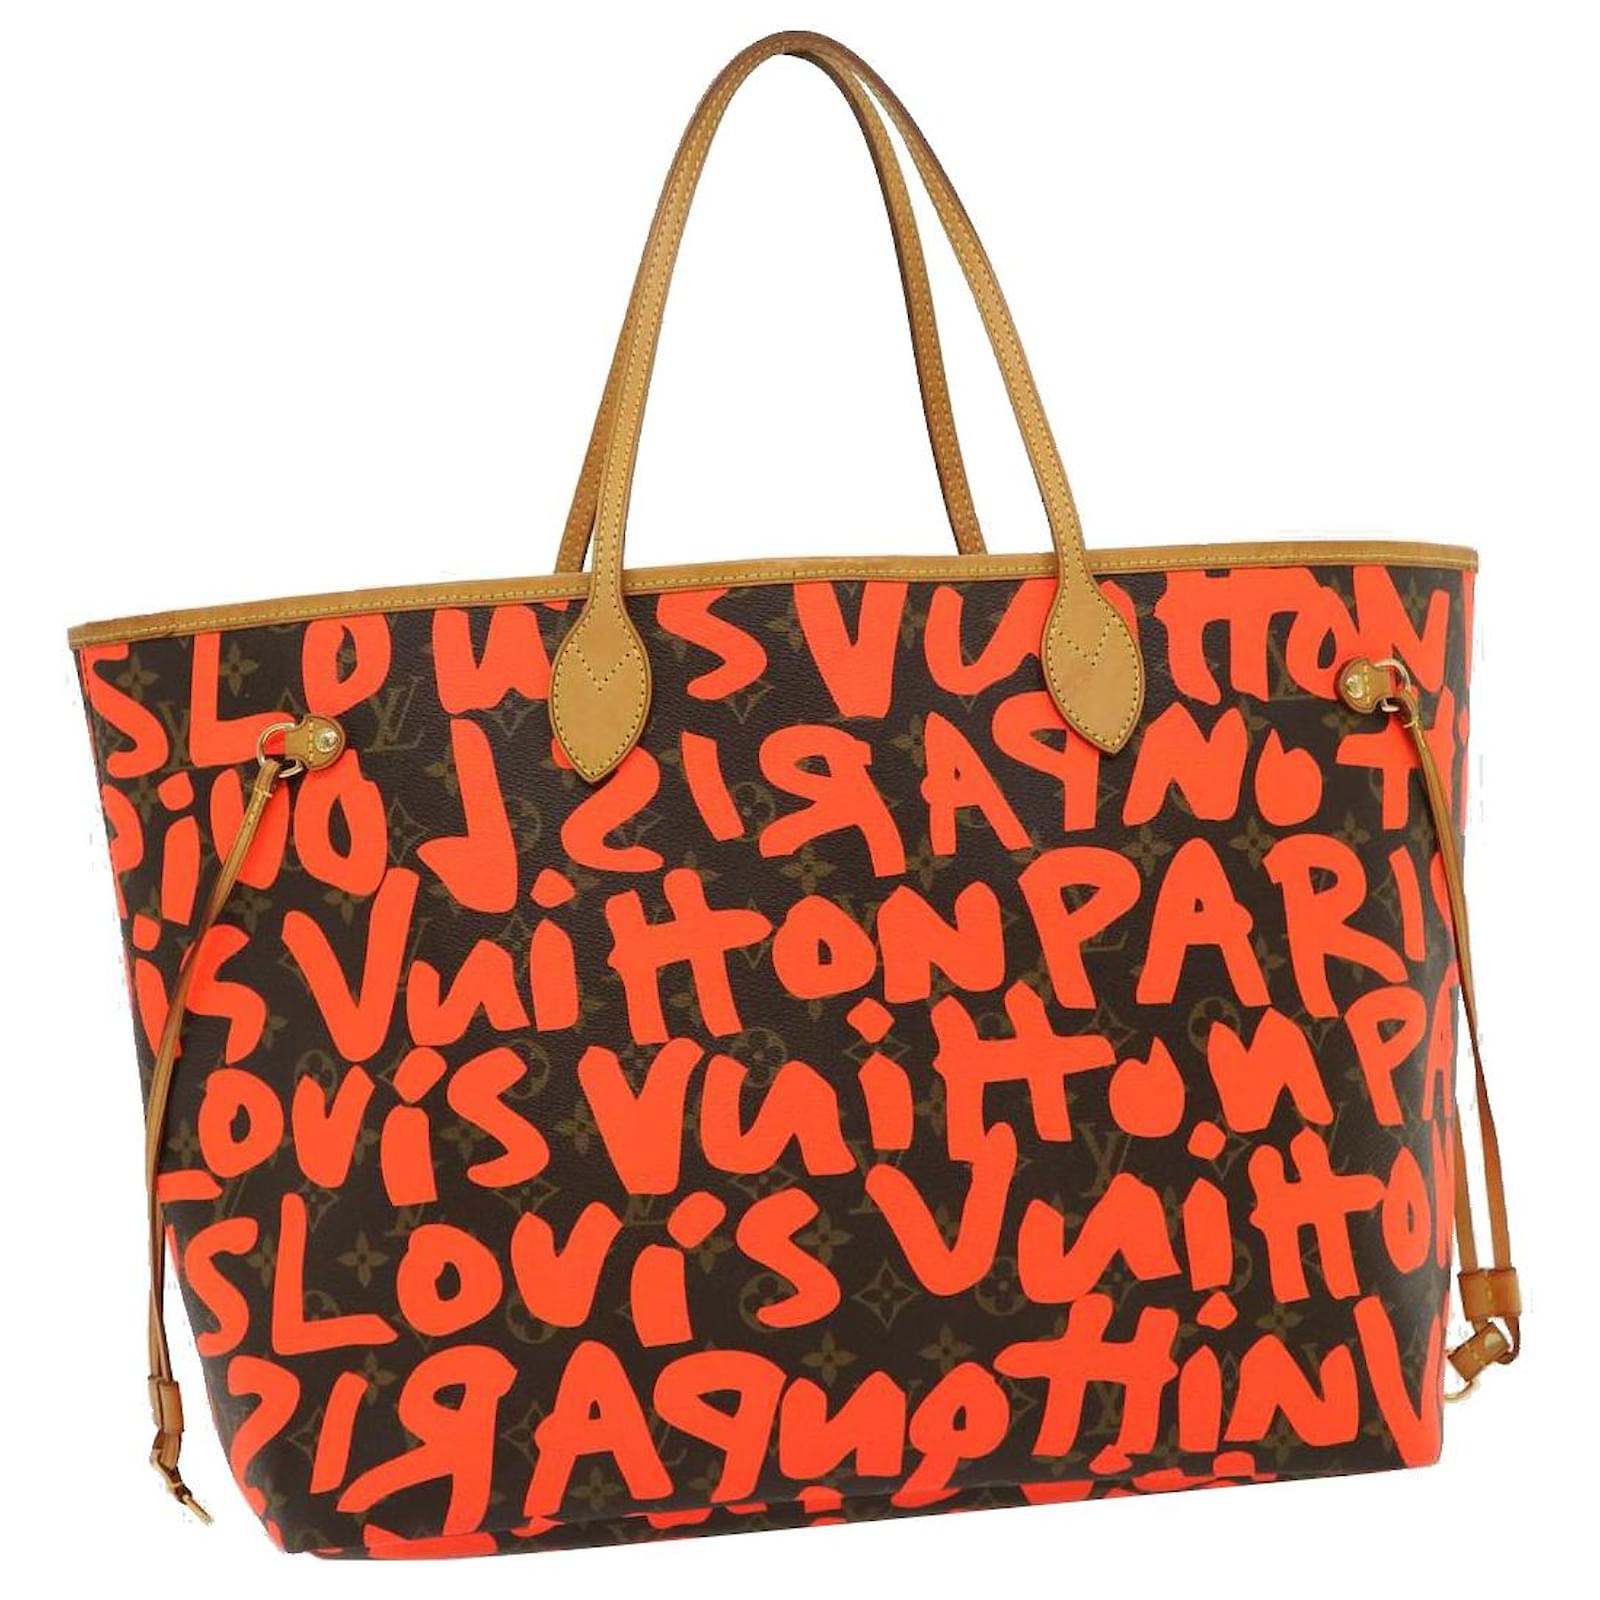 Louis Vuitton Neverfull Gm Measurements Inches